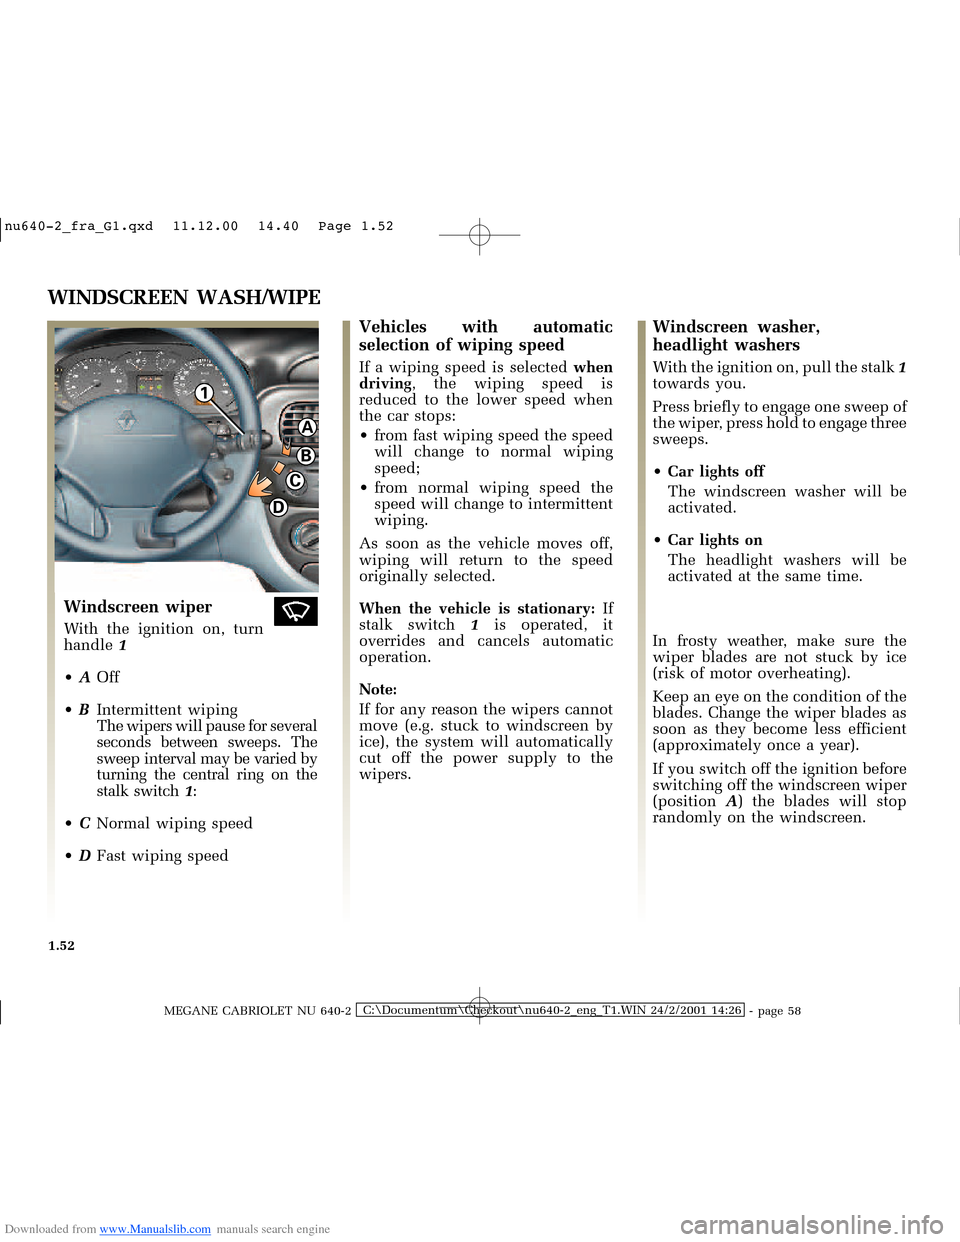 RENAULT MEGANE 2000 X64 / 1.G Owners Manual Downloaded from www.Manualslib.com manuals search engine A
B
C
D
1
�Q�X������B�I�U�D�B�*���T�[�G� � ��������� � ������ � �3�D�J�H� ����
MEGANE CABRIOLET NU 640-2C:\Docum